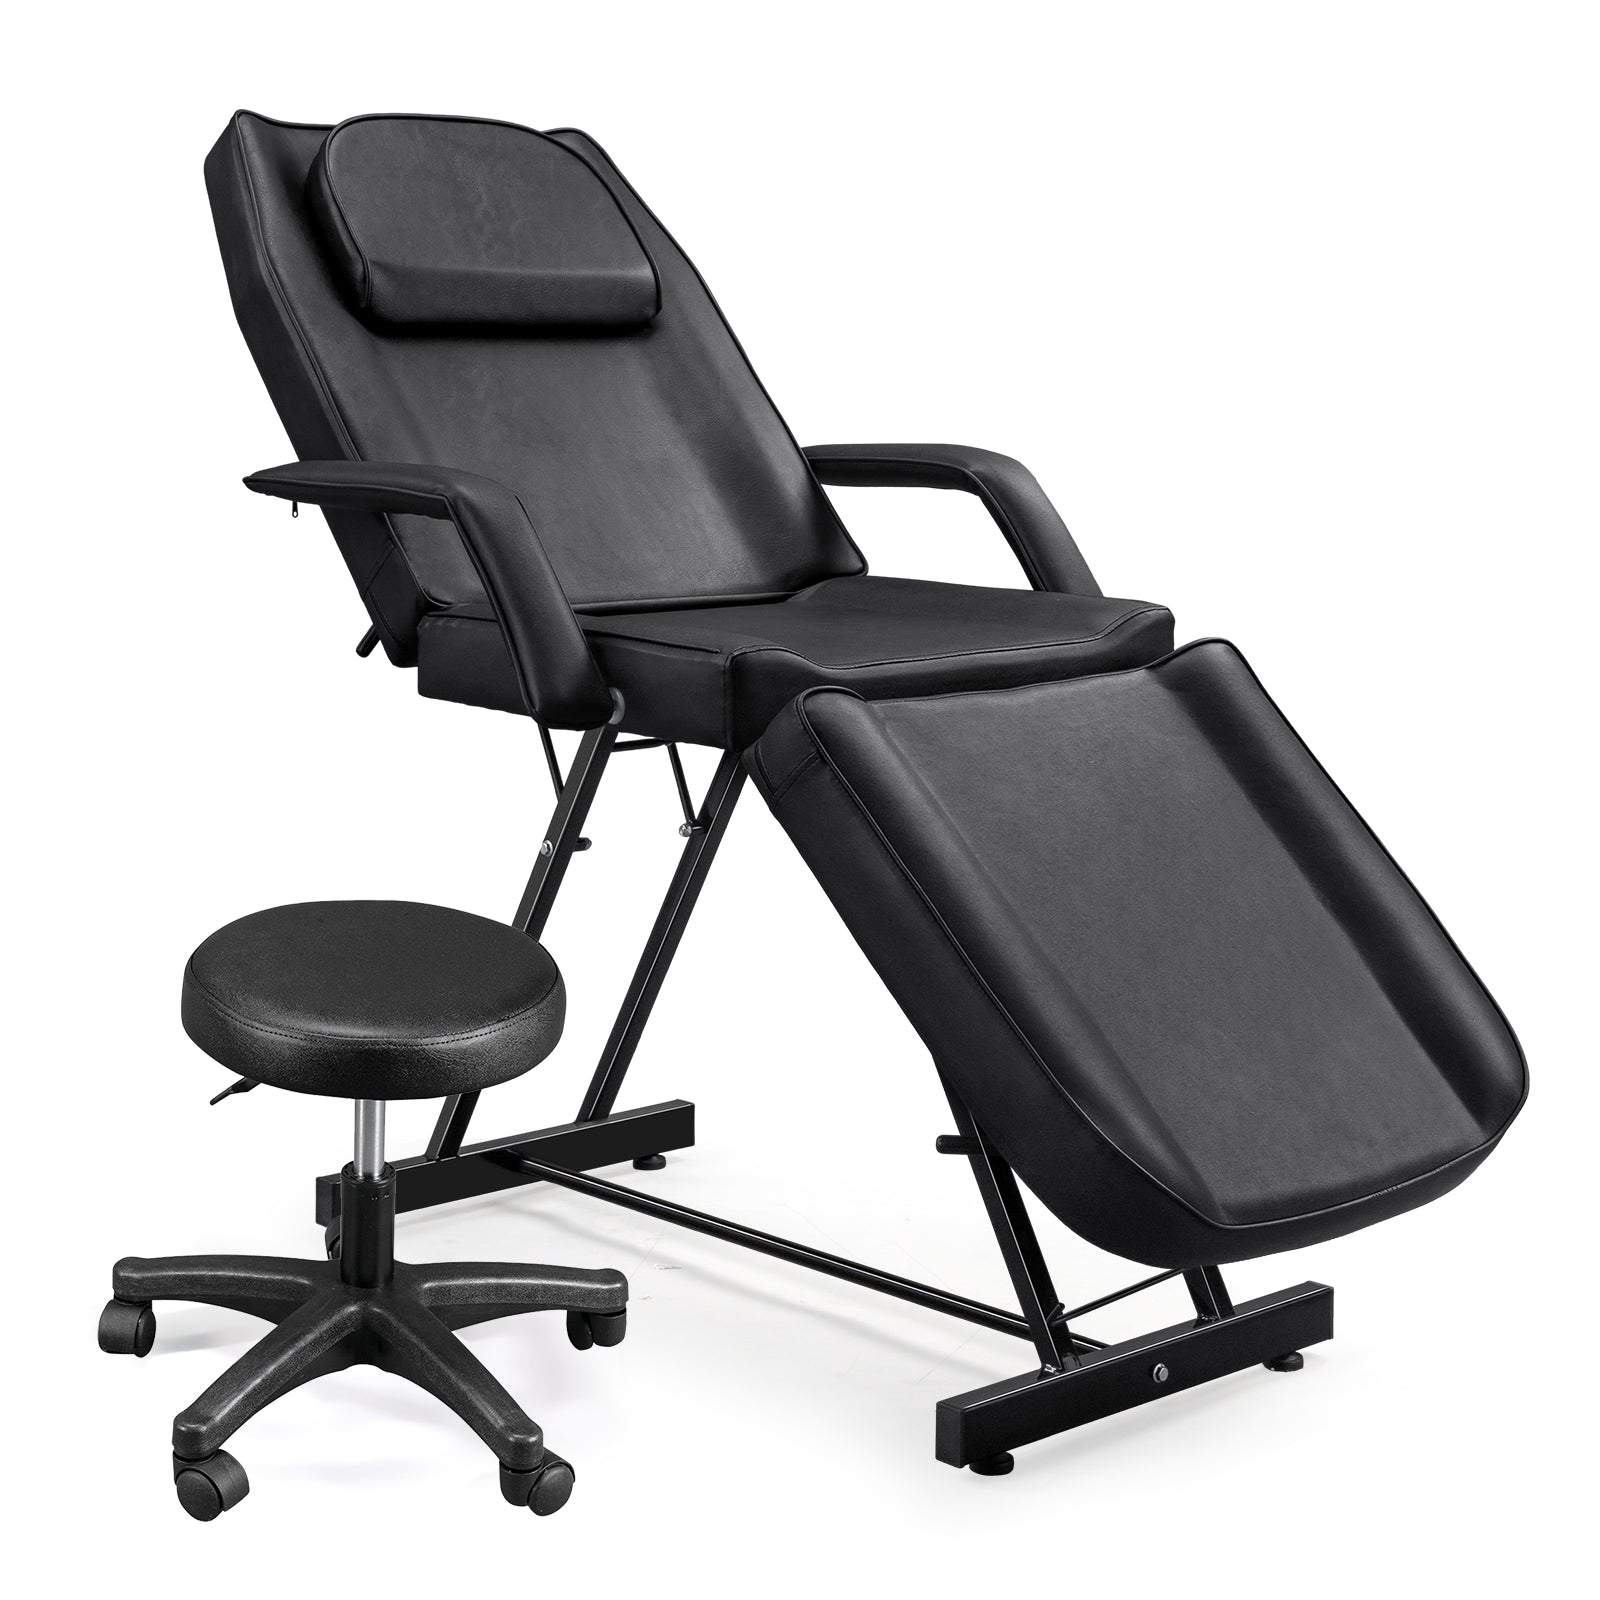 OmySalon Salon Tattoo Chair Esthetician Bed Multi-Purpose Facial Bed Chair with Hydraulic Stool